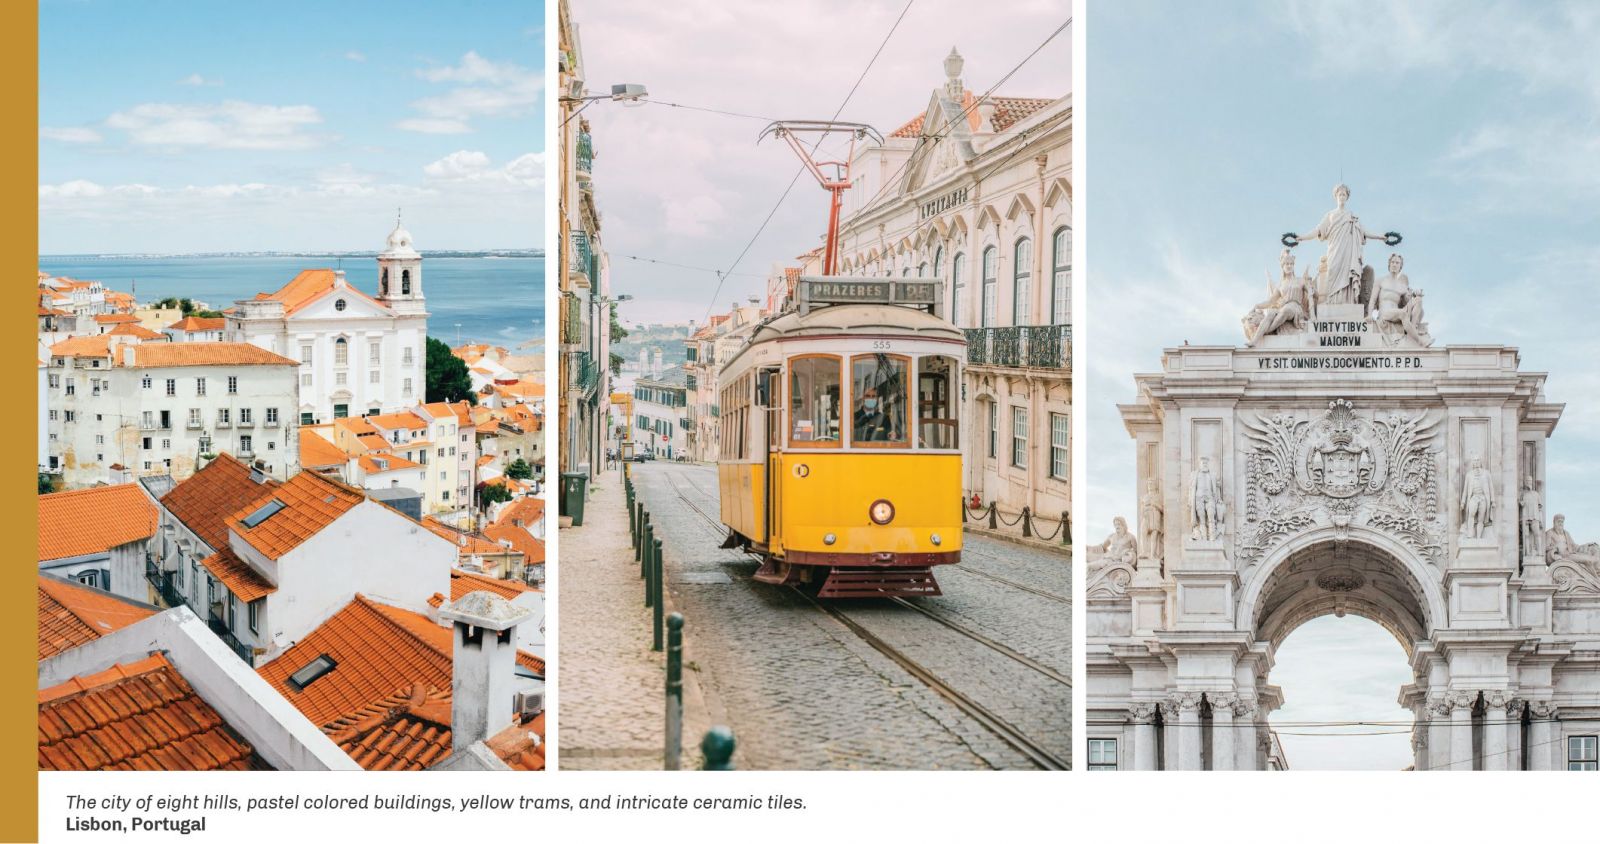 Golden Visa real estate investments in Lisbon, Portugal Homes presents our latest property listings in Lisbon.